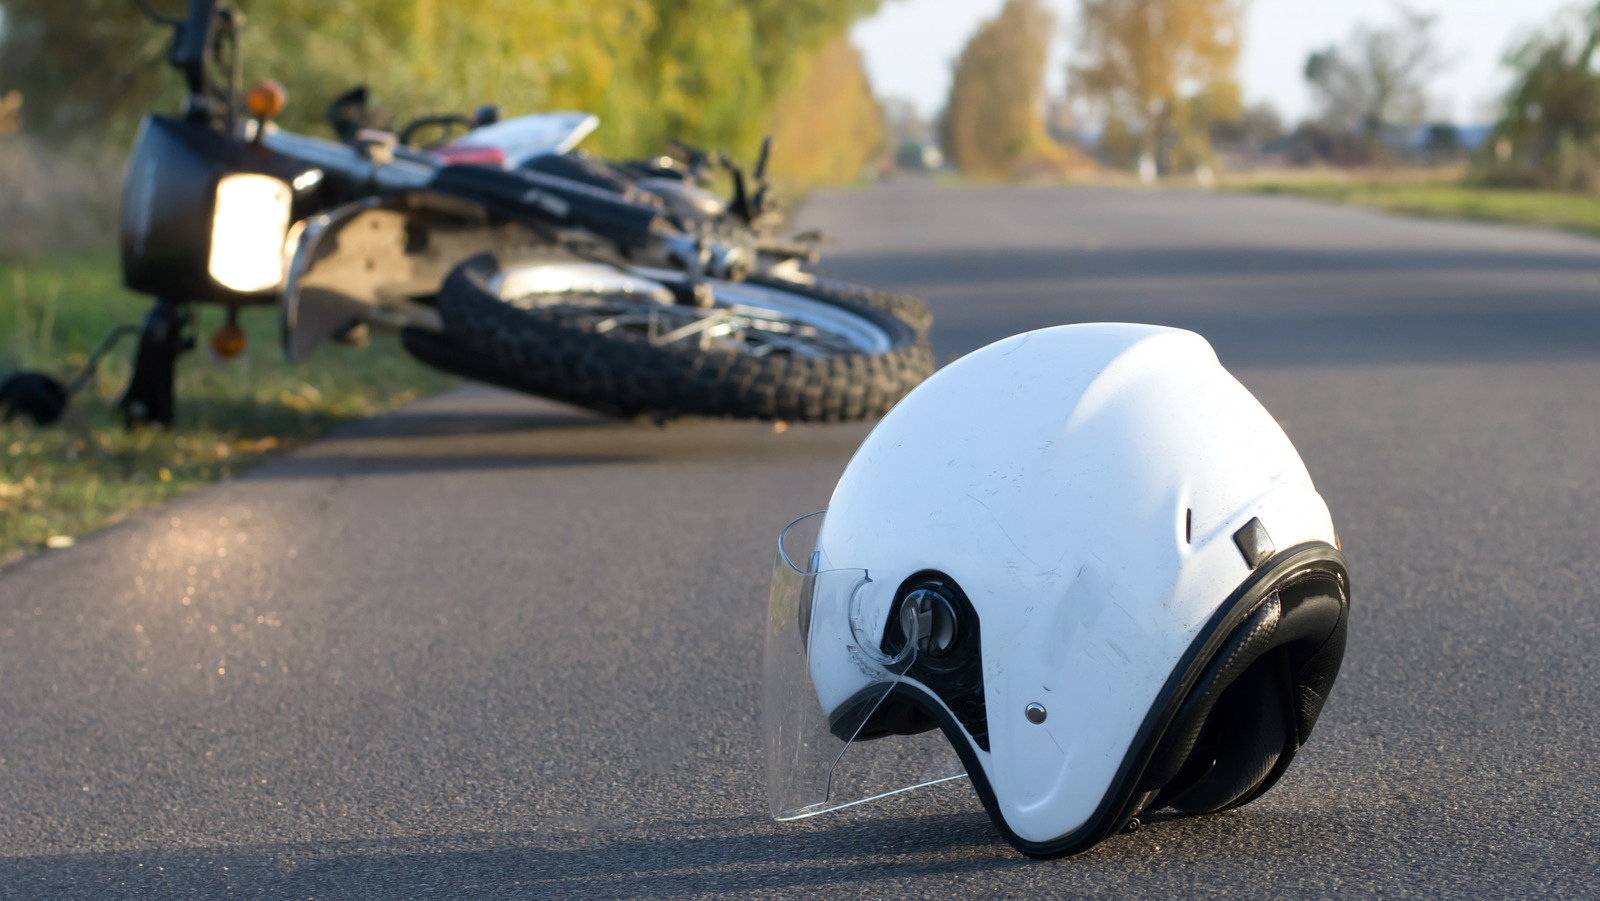 A Simple Explanation As To Why Motorcycles Don’t Have Seatbelts – SlashGear